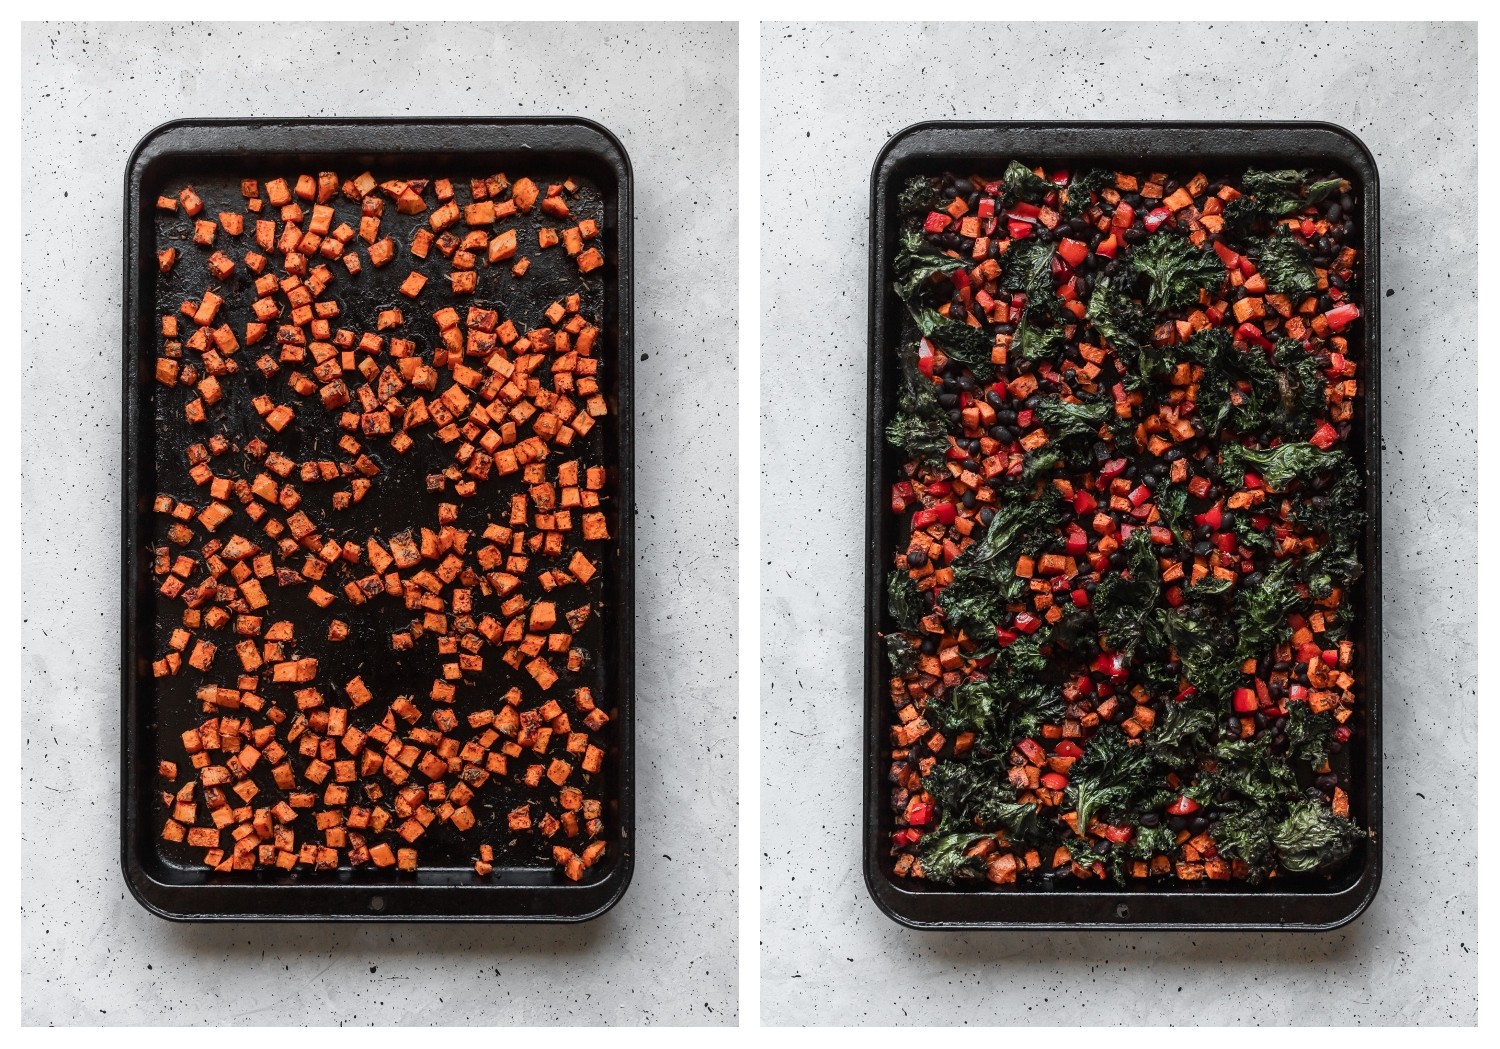 Two bird's eye shots of a sheet pan placed on a grey table. On the first pan, there is roasted sweet potatoes. On the second pan, there is roasted sweet potatoes, peppers, and kale.